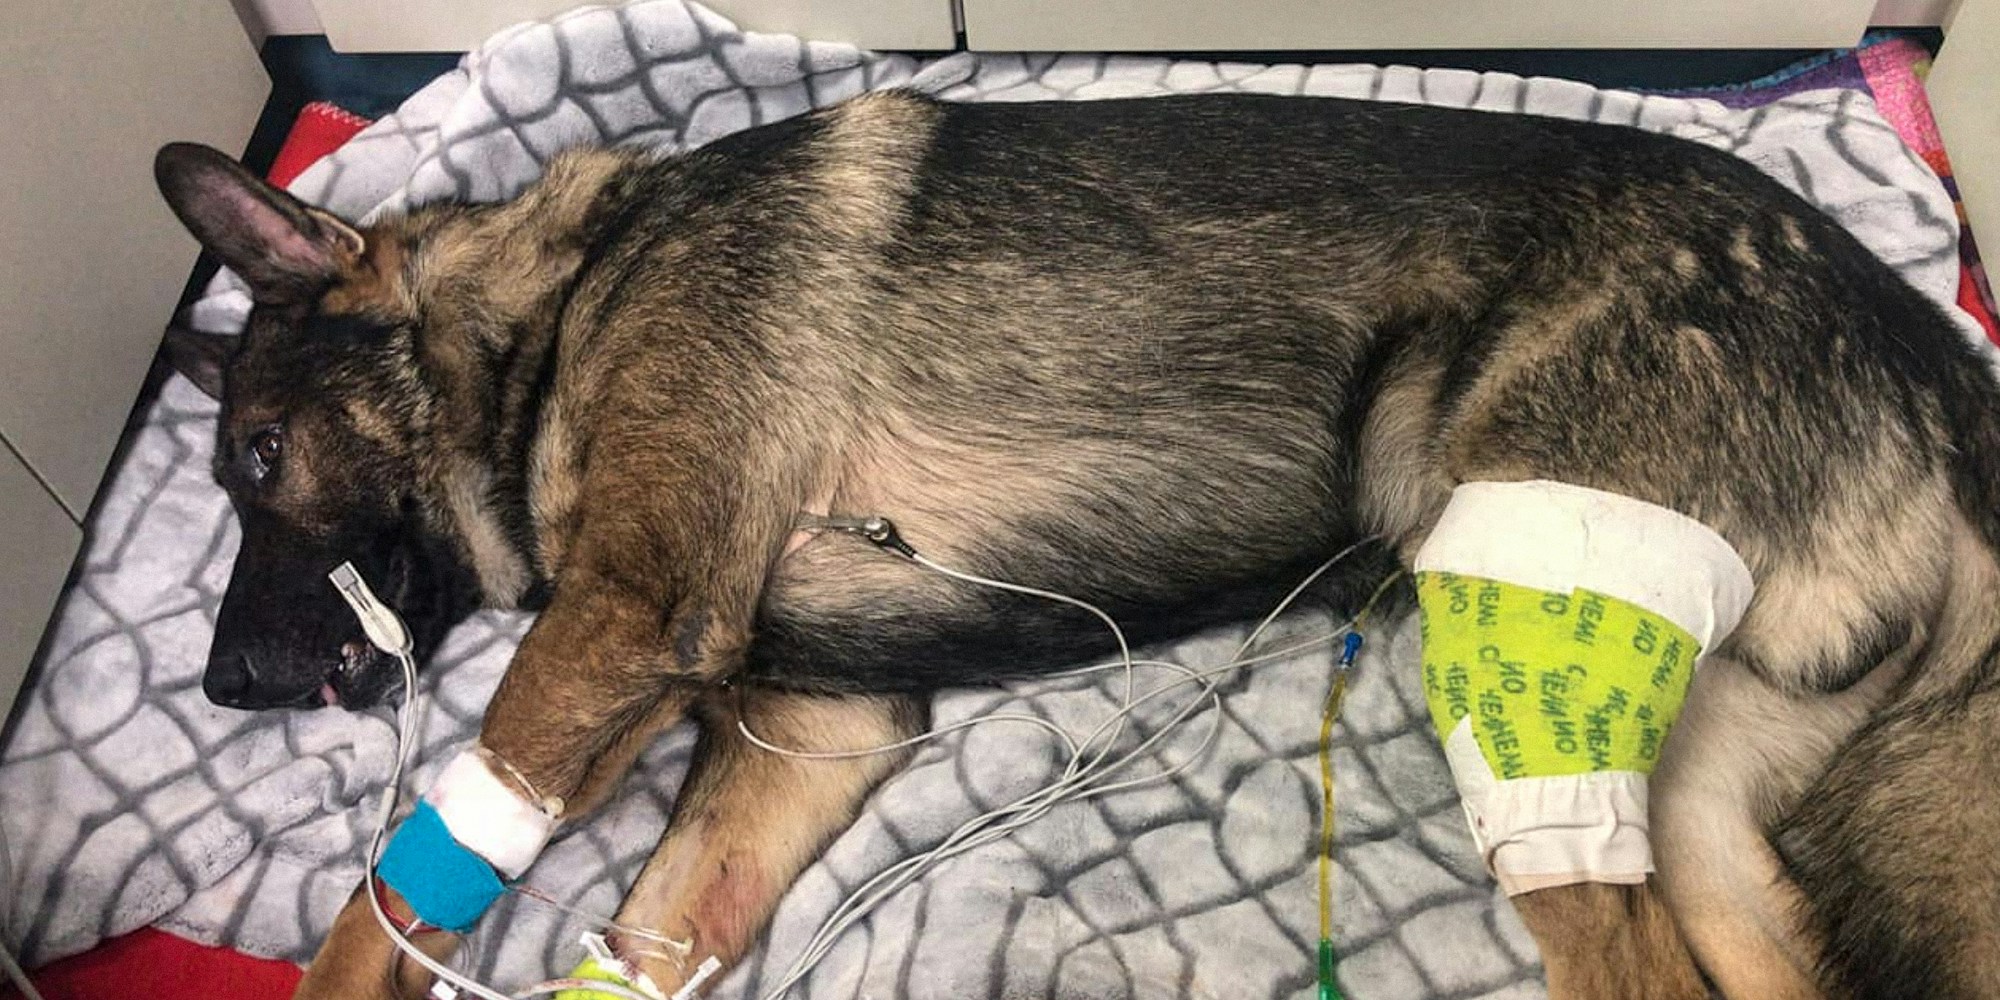 A screenshot of a photograph showing K-9 Arlo used by the Thurston County Deputy Sheriff’s Foundation's GoFundMe page for veterinary bills.